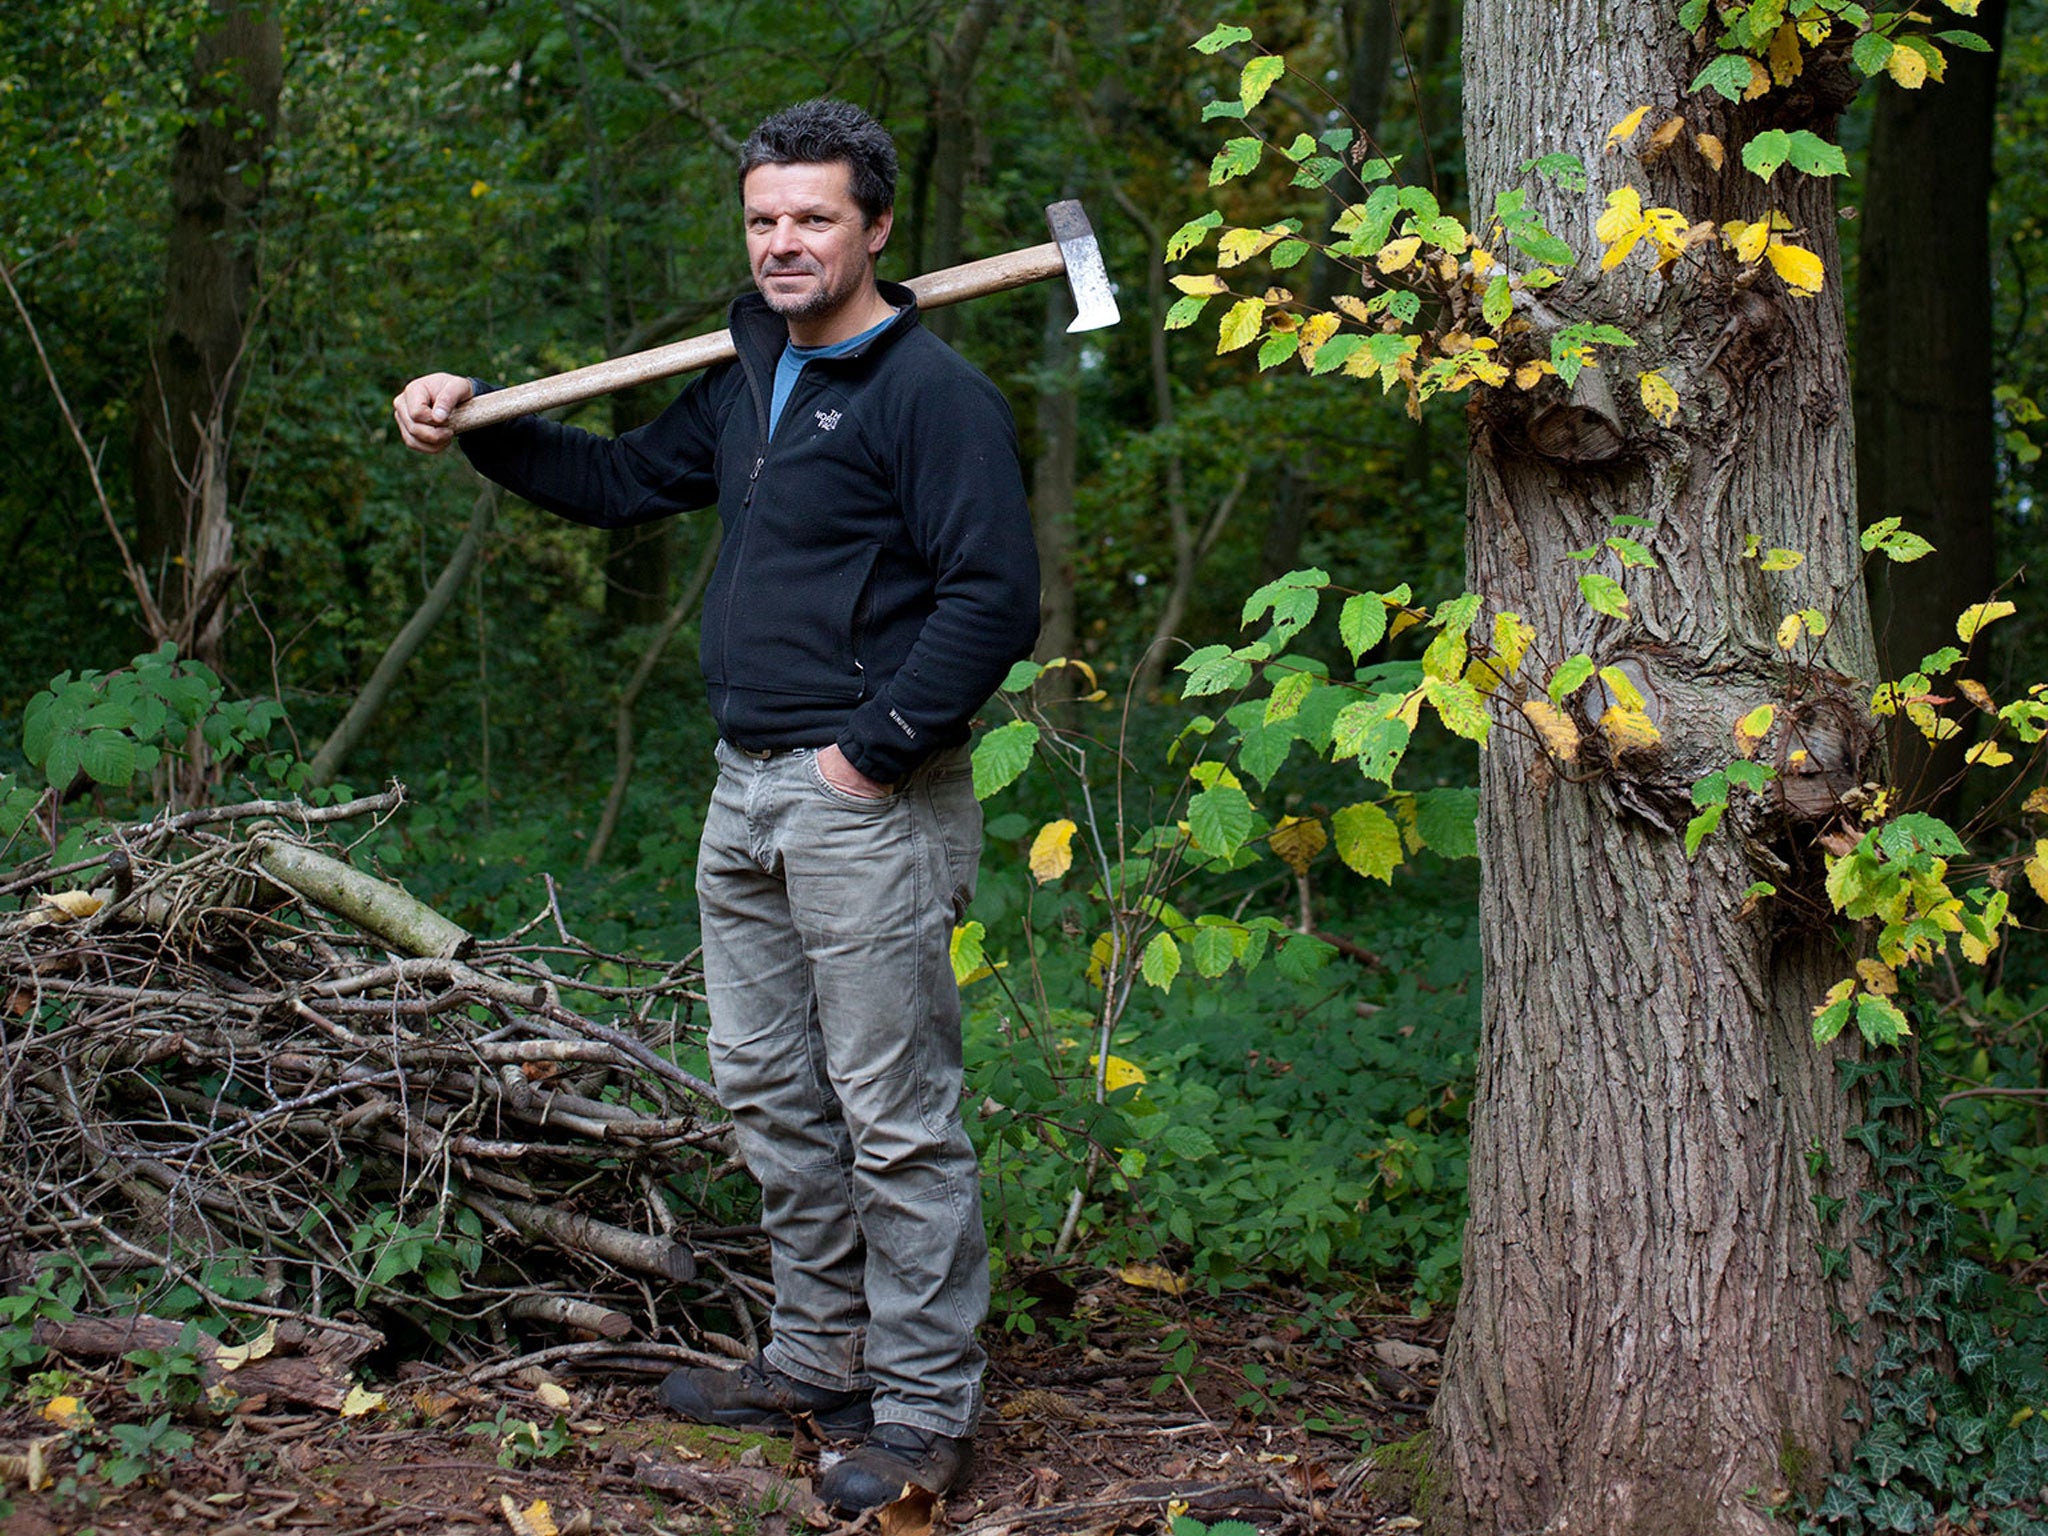 Rob started to coppice - the ancient woodland-management practice of cutting trees back to ground level to stimulate regrowth - and the cycle is now a cardinal component of his existence